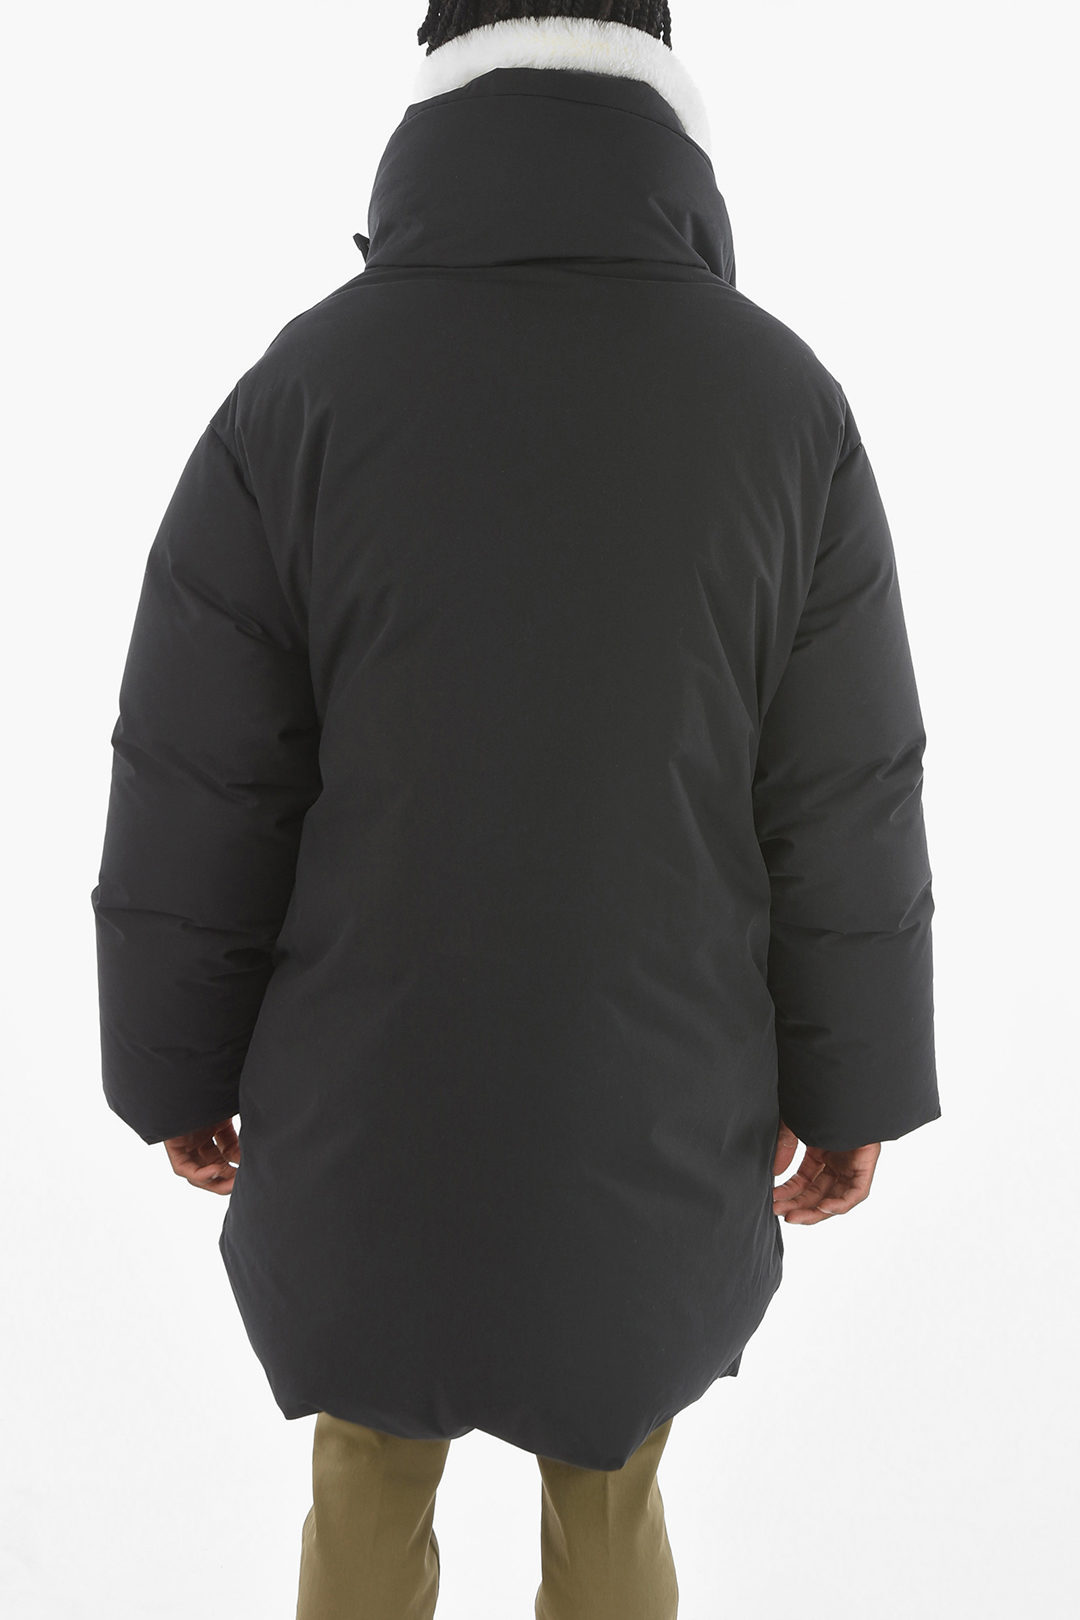 mengsel innovatie Gewend Givenchy Duck Down Parka with Contrasting Real-fur Collar men - Glamood  Outlet